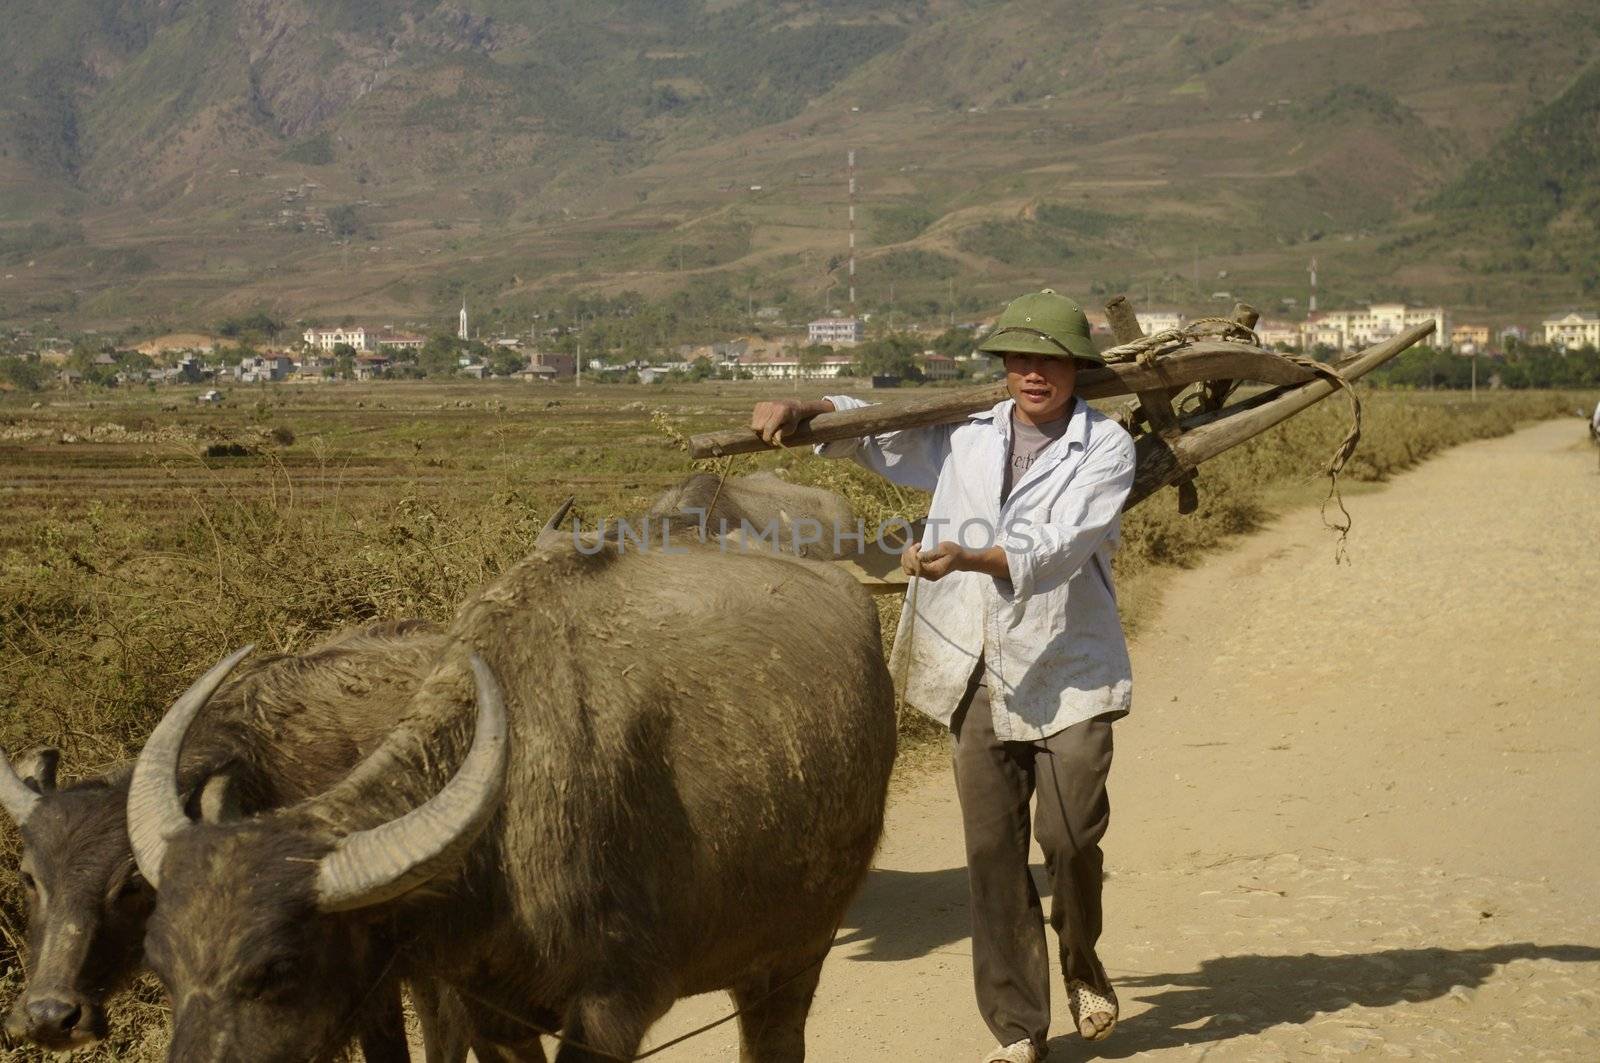 This young farmer goes to the field with his buffalo.